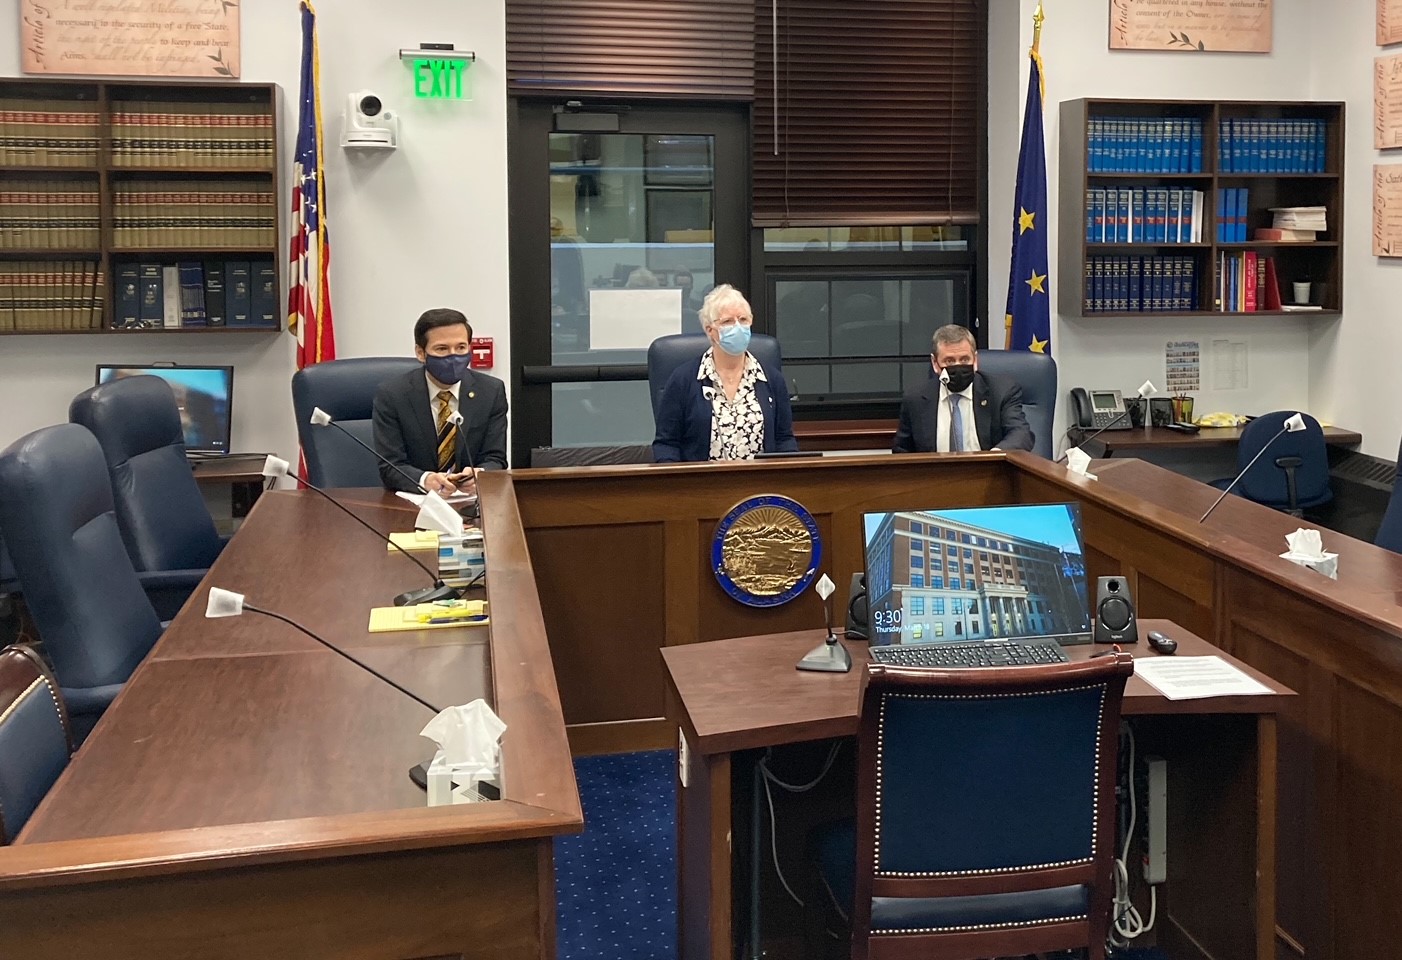 Rep. Neal Foster, D-Nome; House Speaker Louise Stutes, R-Kodiak; and Rep. Chris Tuck, D-Anchorage prepare for a House majority caucus news conference on March 18, 2021, ,in the Alaska State Capitol in Juneau, Alaska. (Photo by Andrew Kitchenman/KTOO and Alaska Public Media)